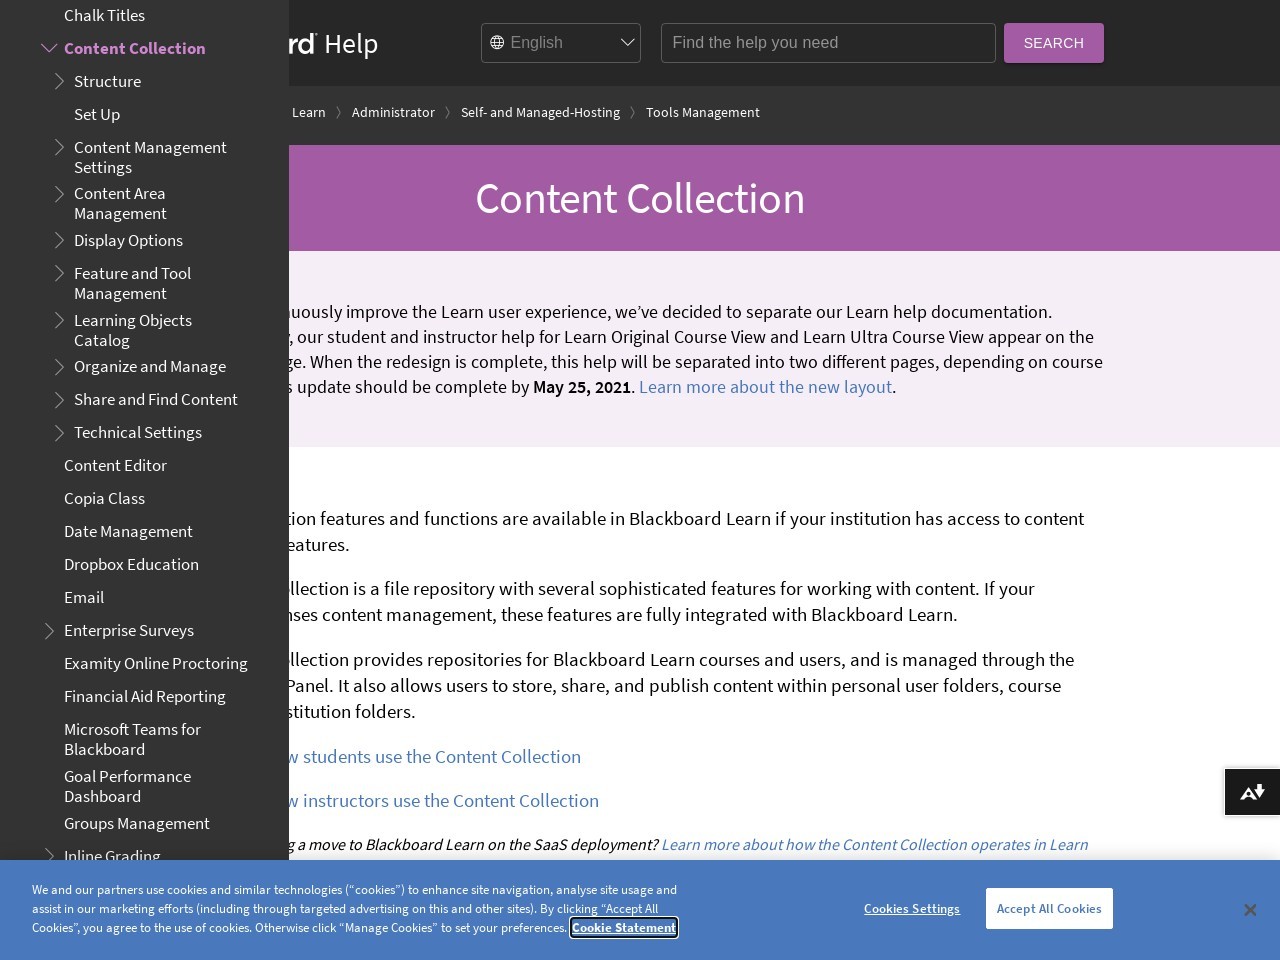 Content Collection | Blackboard Help